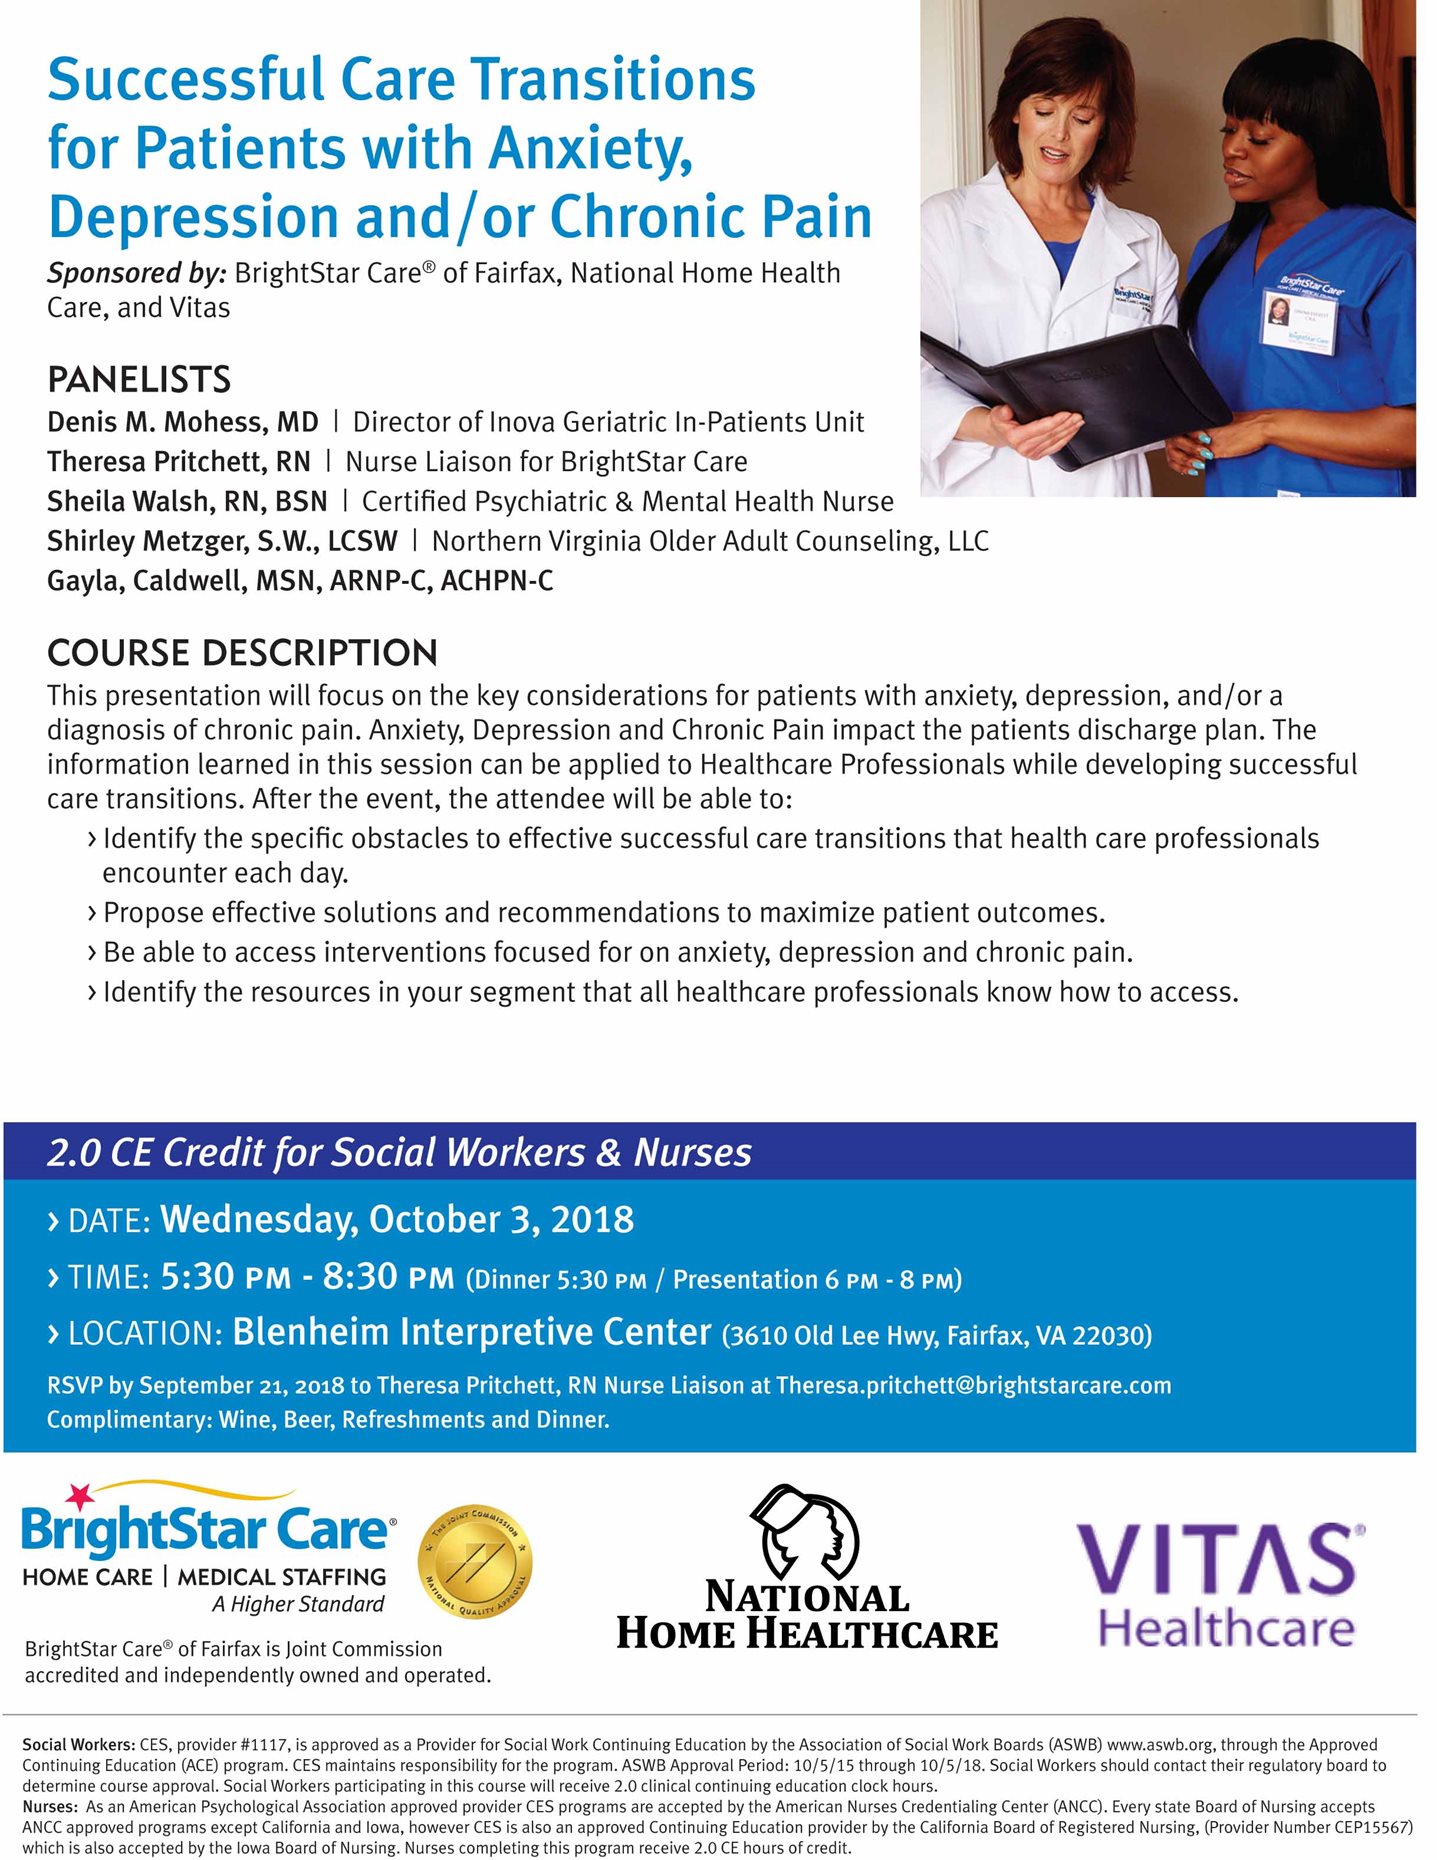 Successful-Care-Transitions-CE-Flyer.jpg